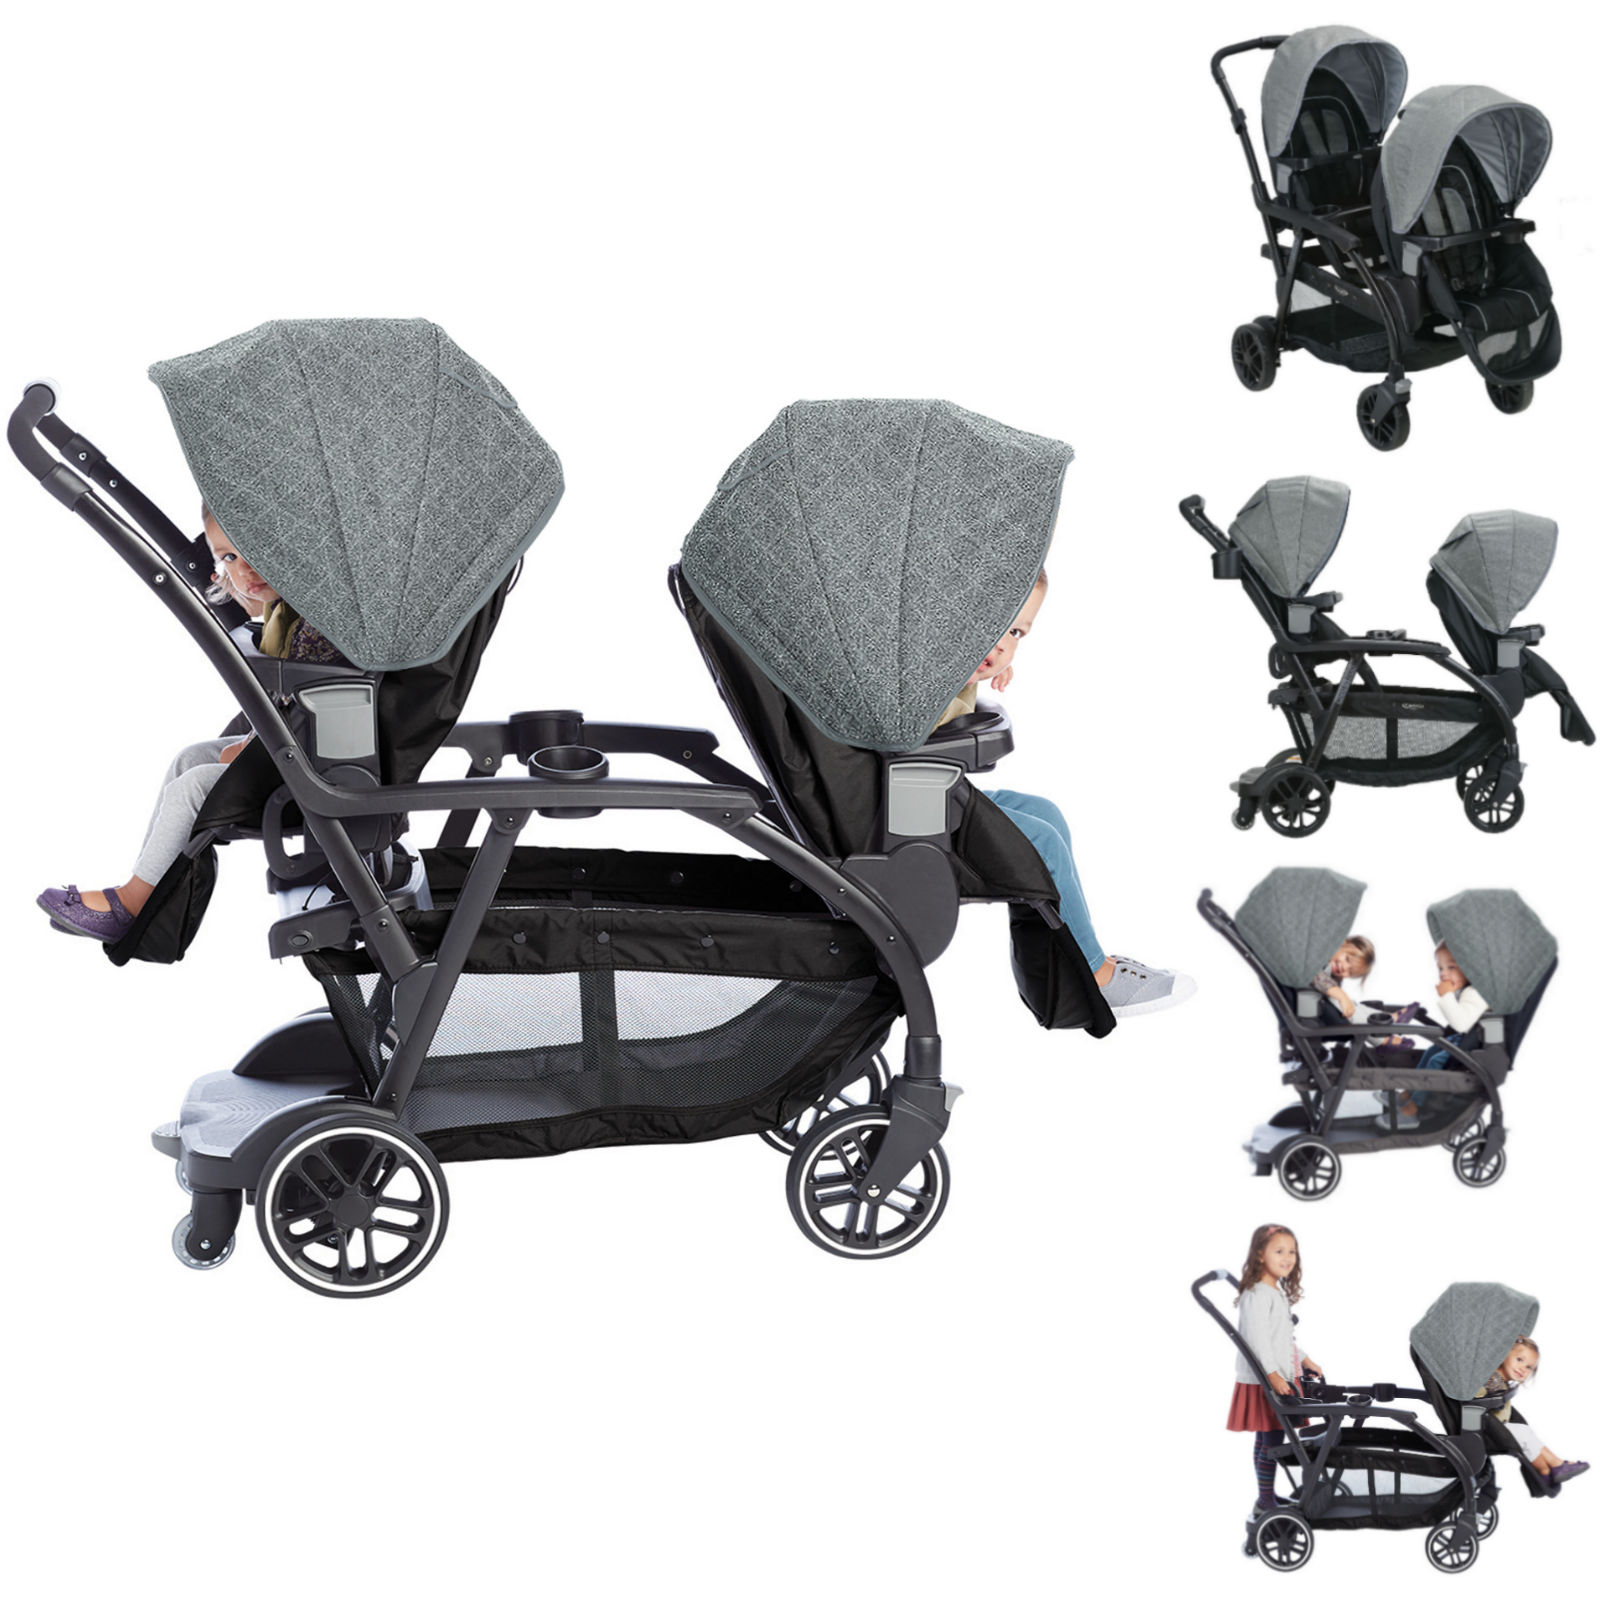 graco modes duo tandem pushchair